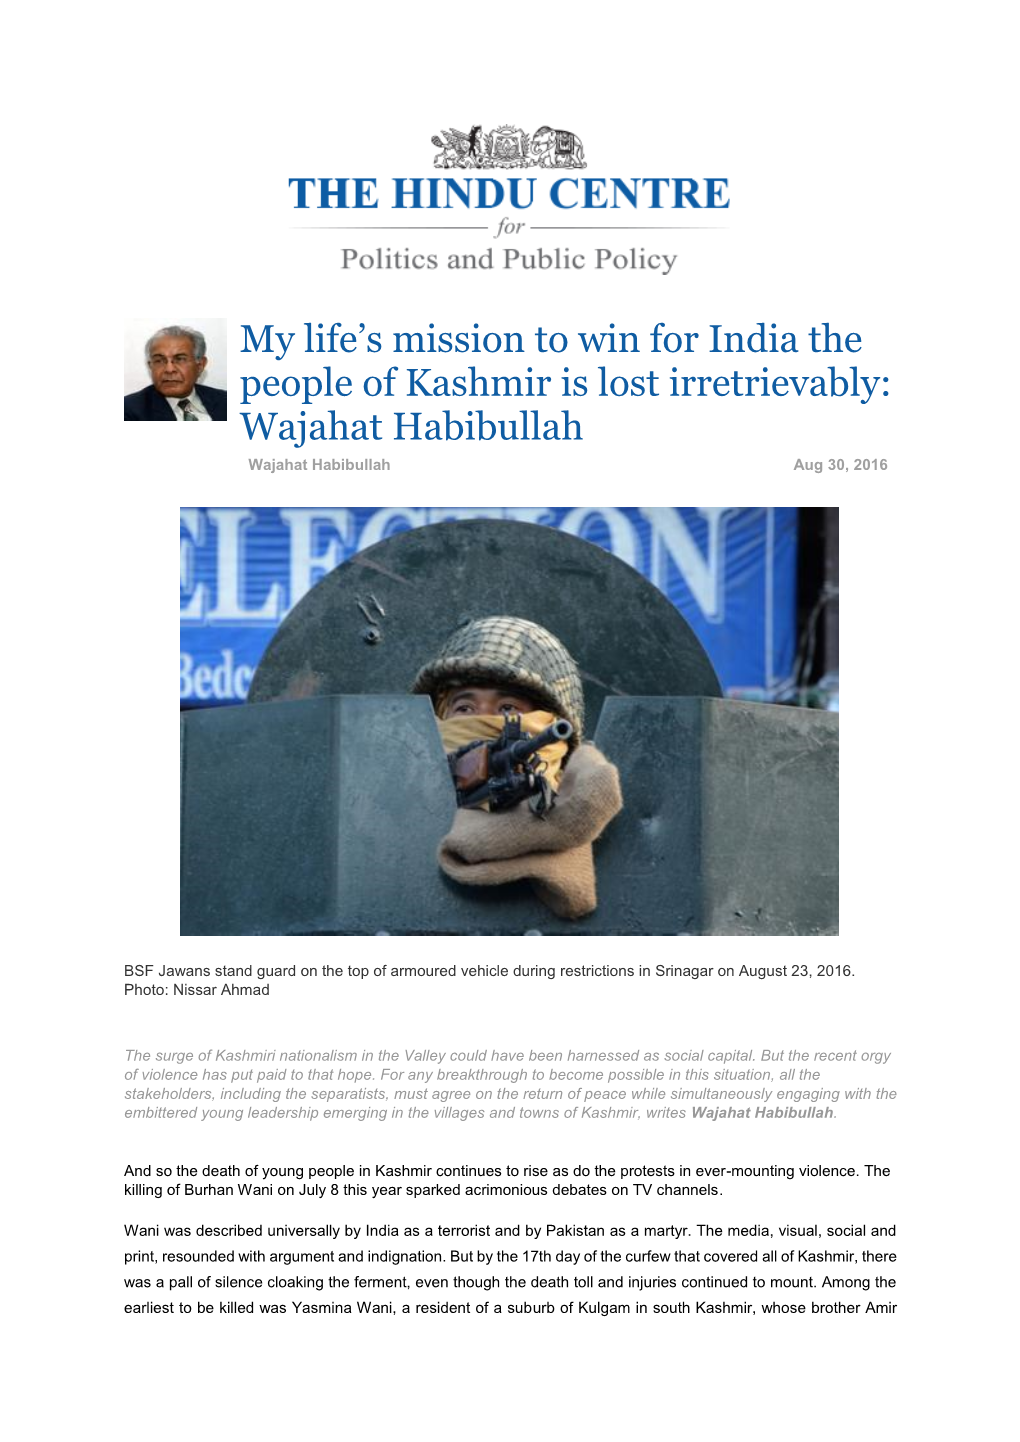 My Life's Mission to Win for India the People of Kashmir Is Lost Irretrievably: Wajahat Habibullah